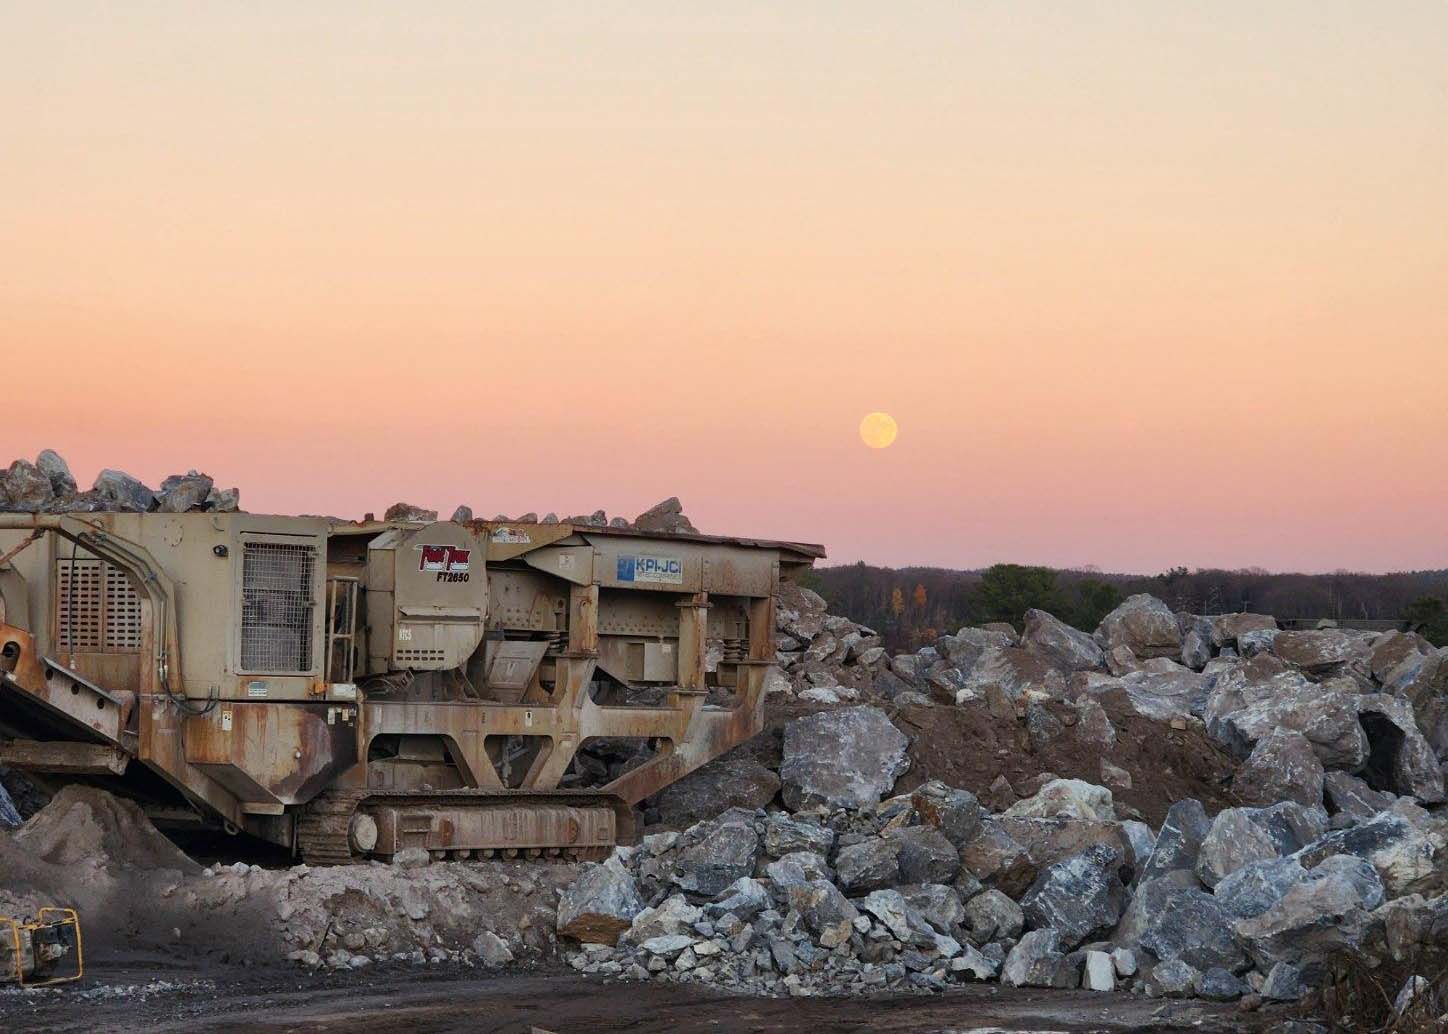 Rock Crushing to Select Materials – December 2022